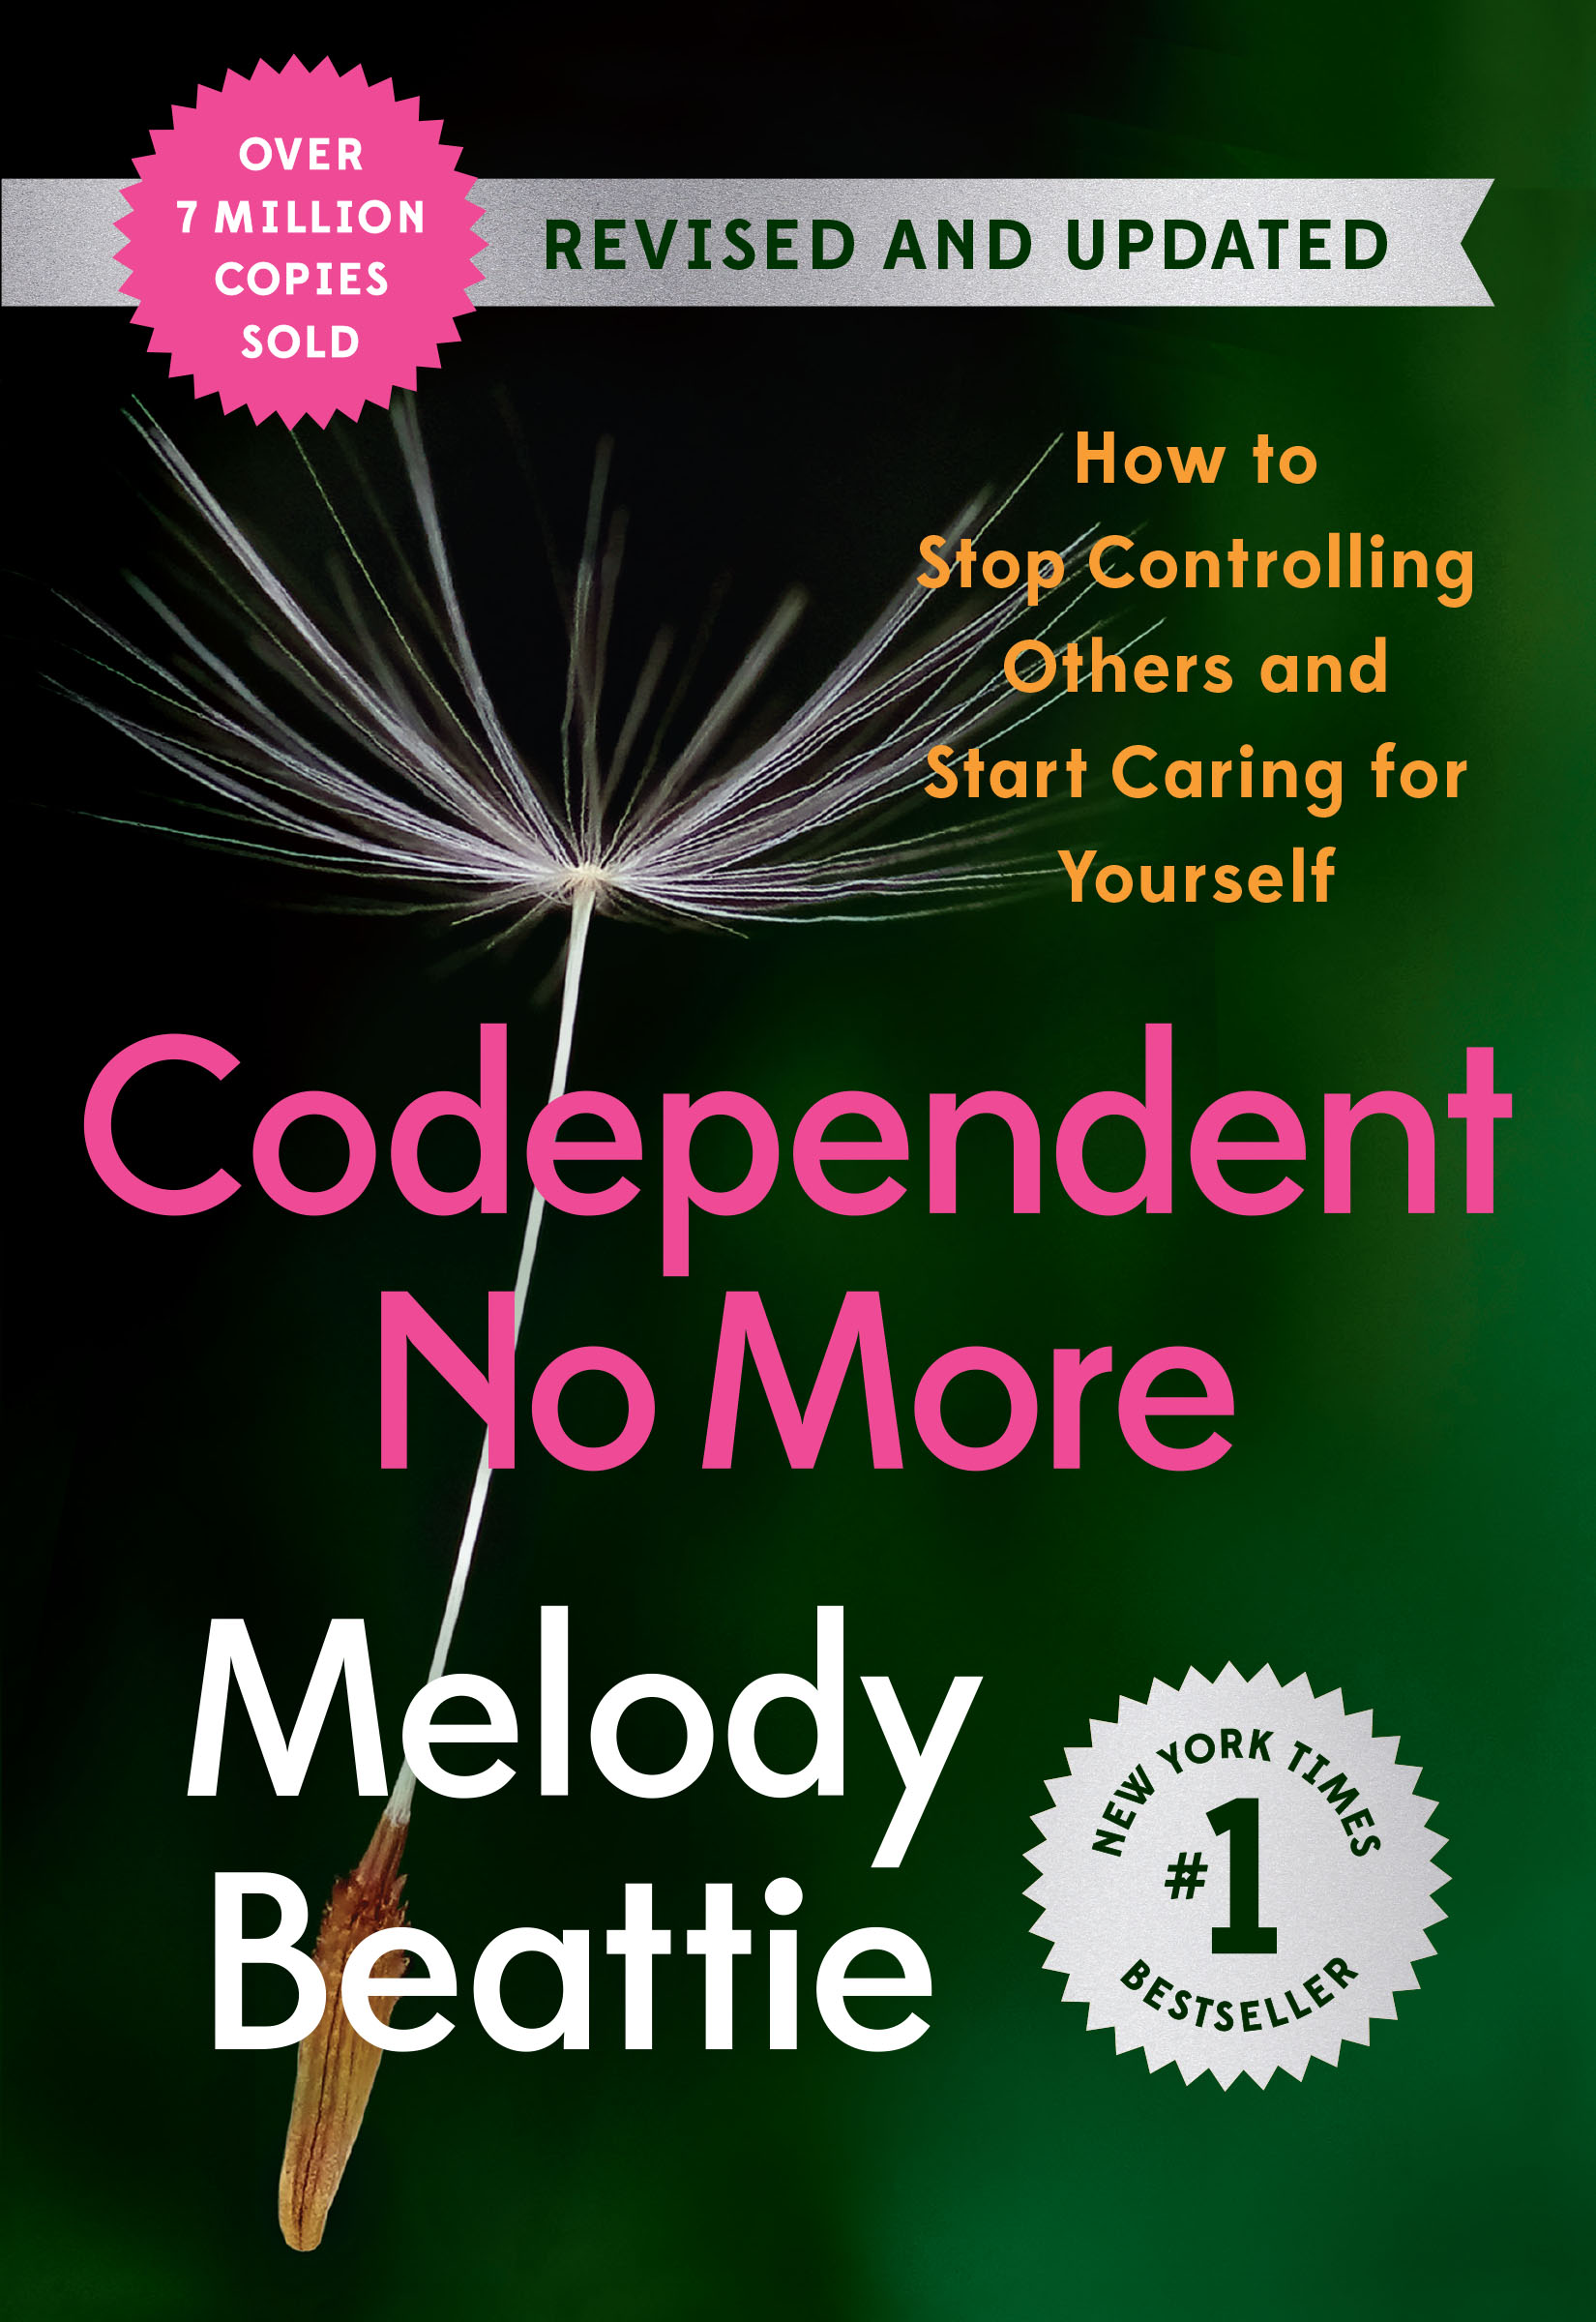 Codependent No More : How to Stop Controlling Others and Start Caring for Yourself | Psychology & Self-Improvement